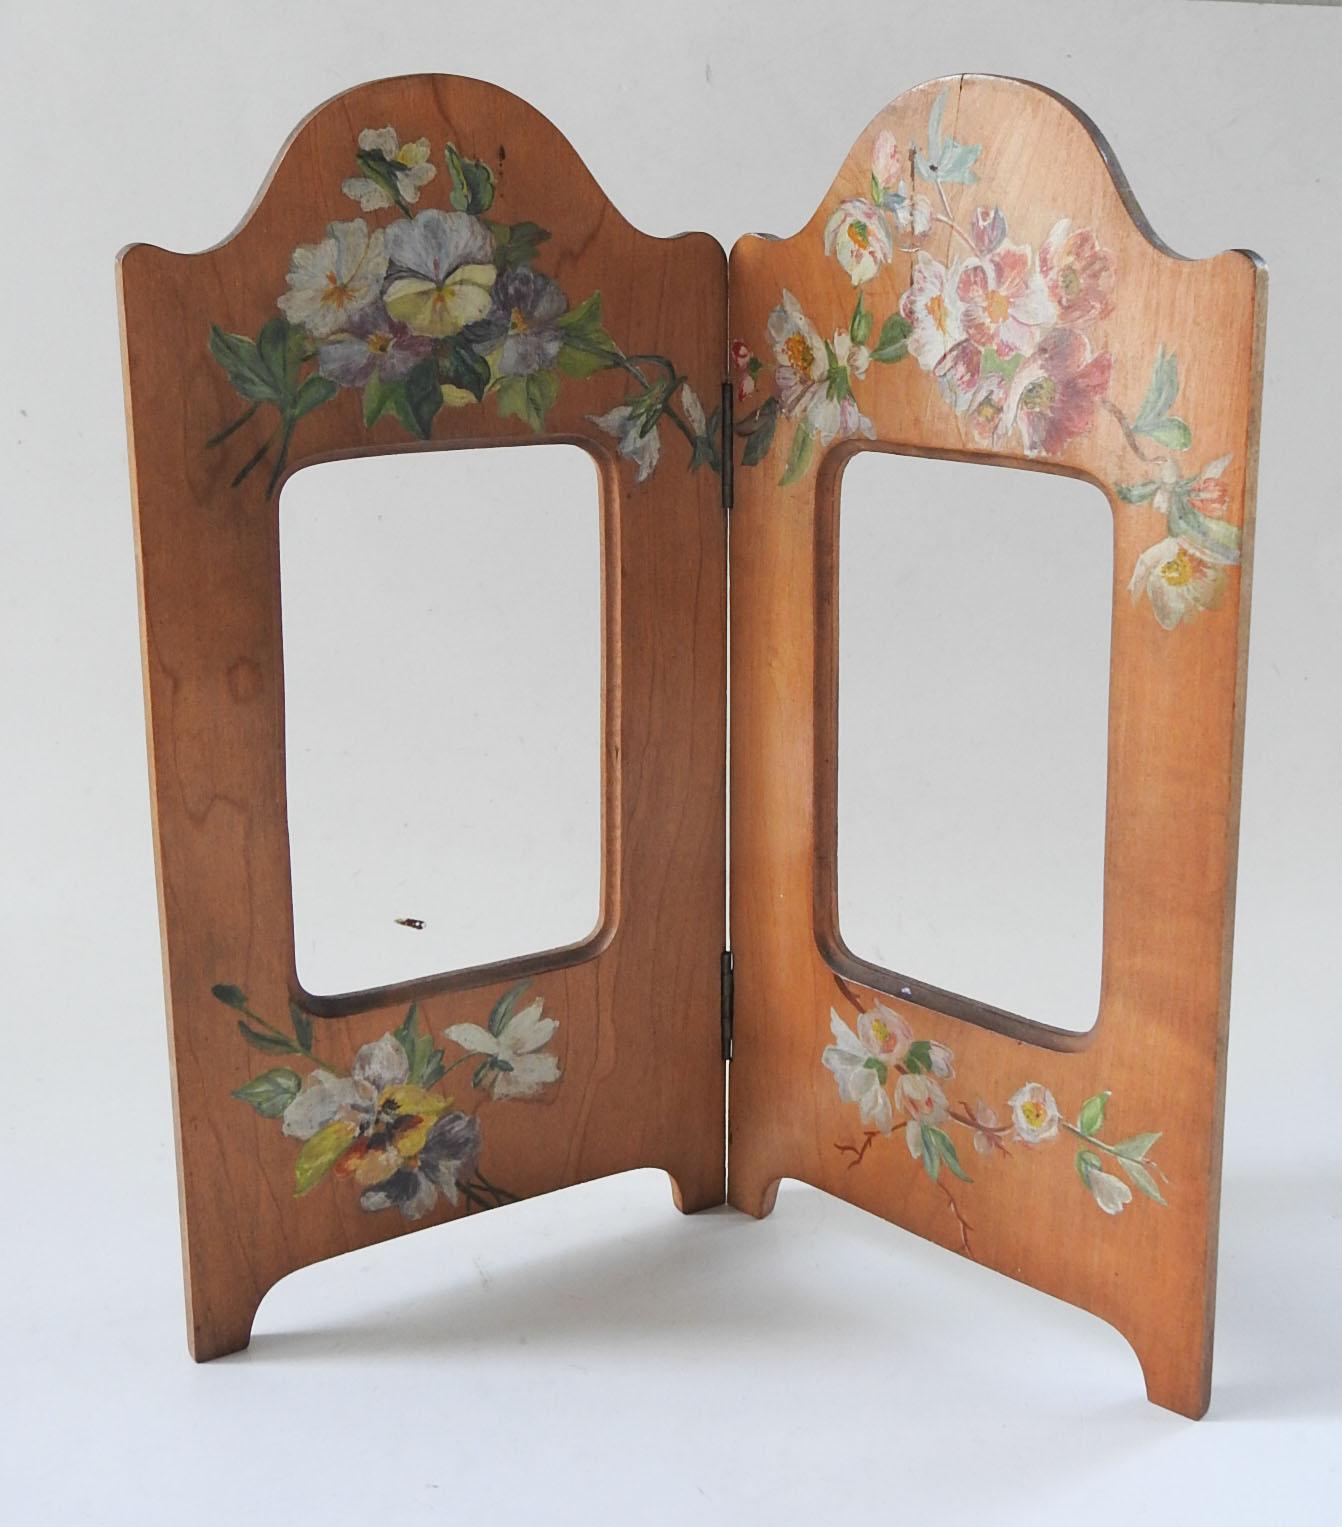 Antique Hinged Table Frame Hand Painted Flowers 1